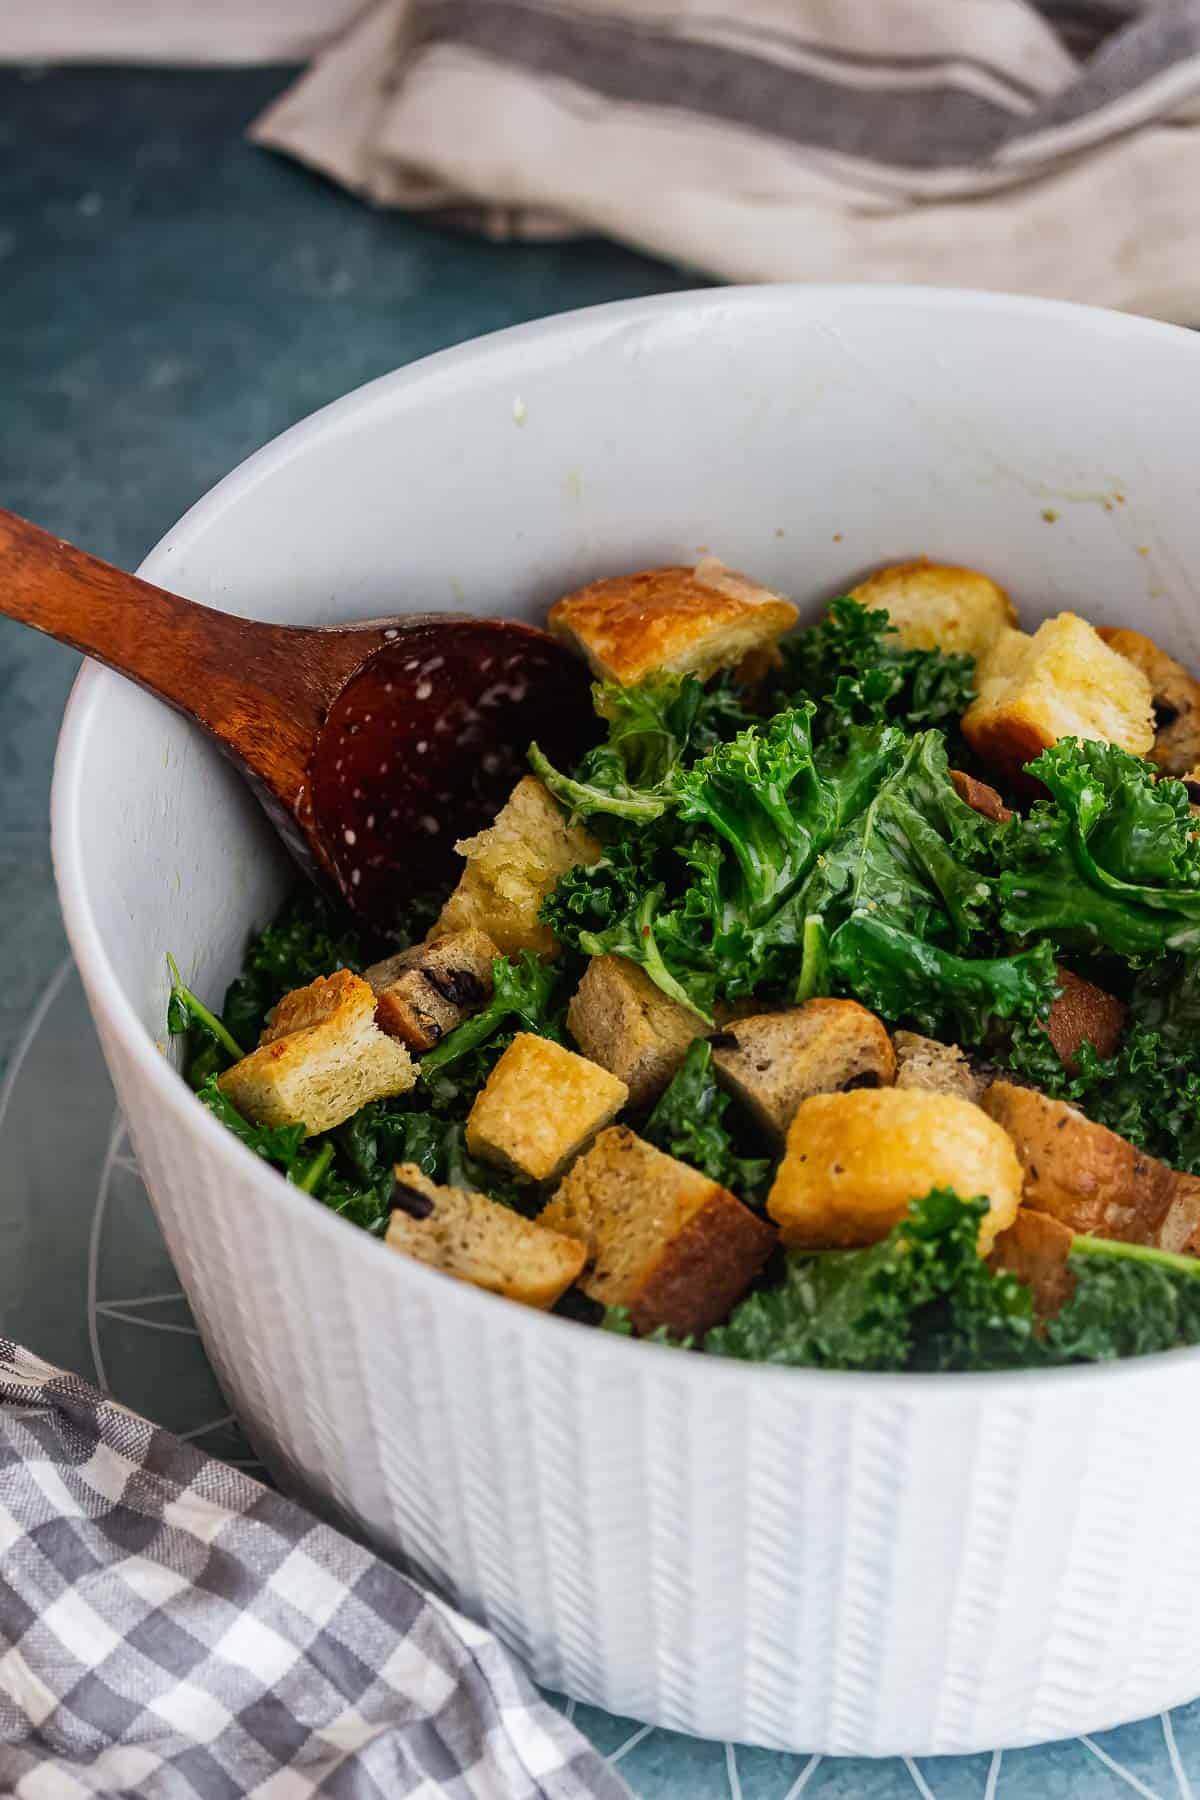 Grey bowl of kale salad with a wooden spoon